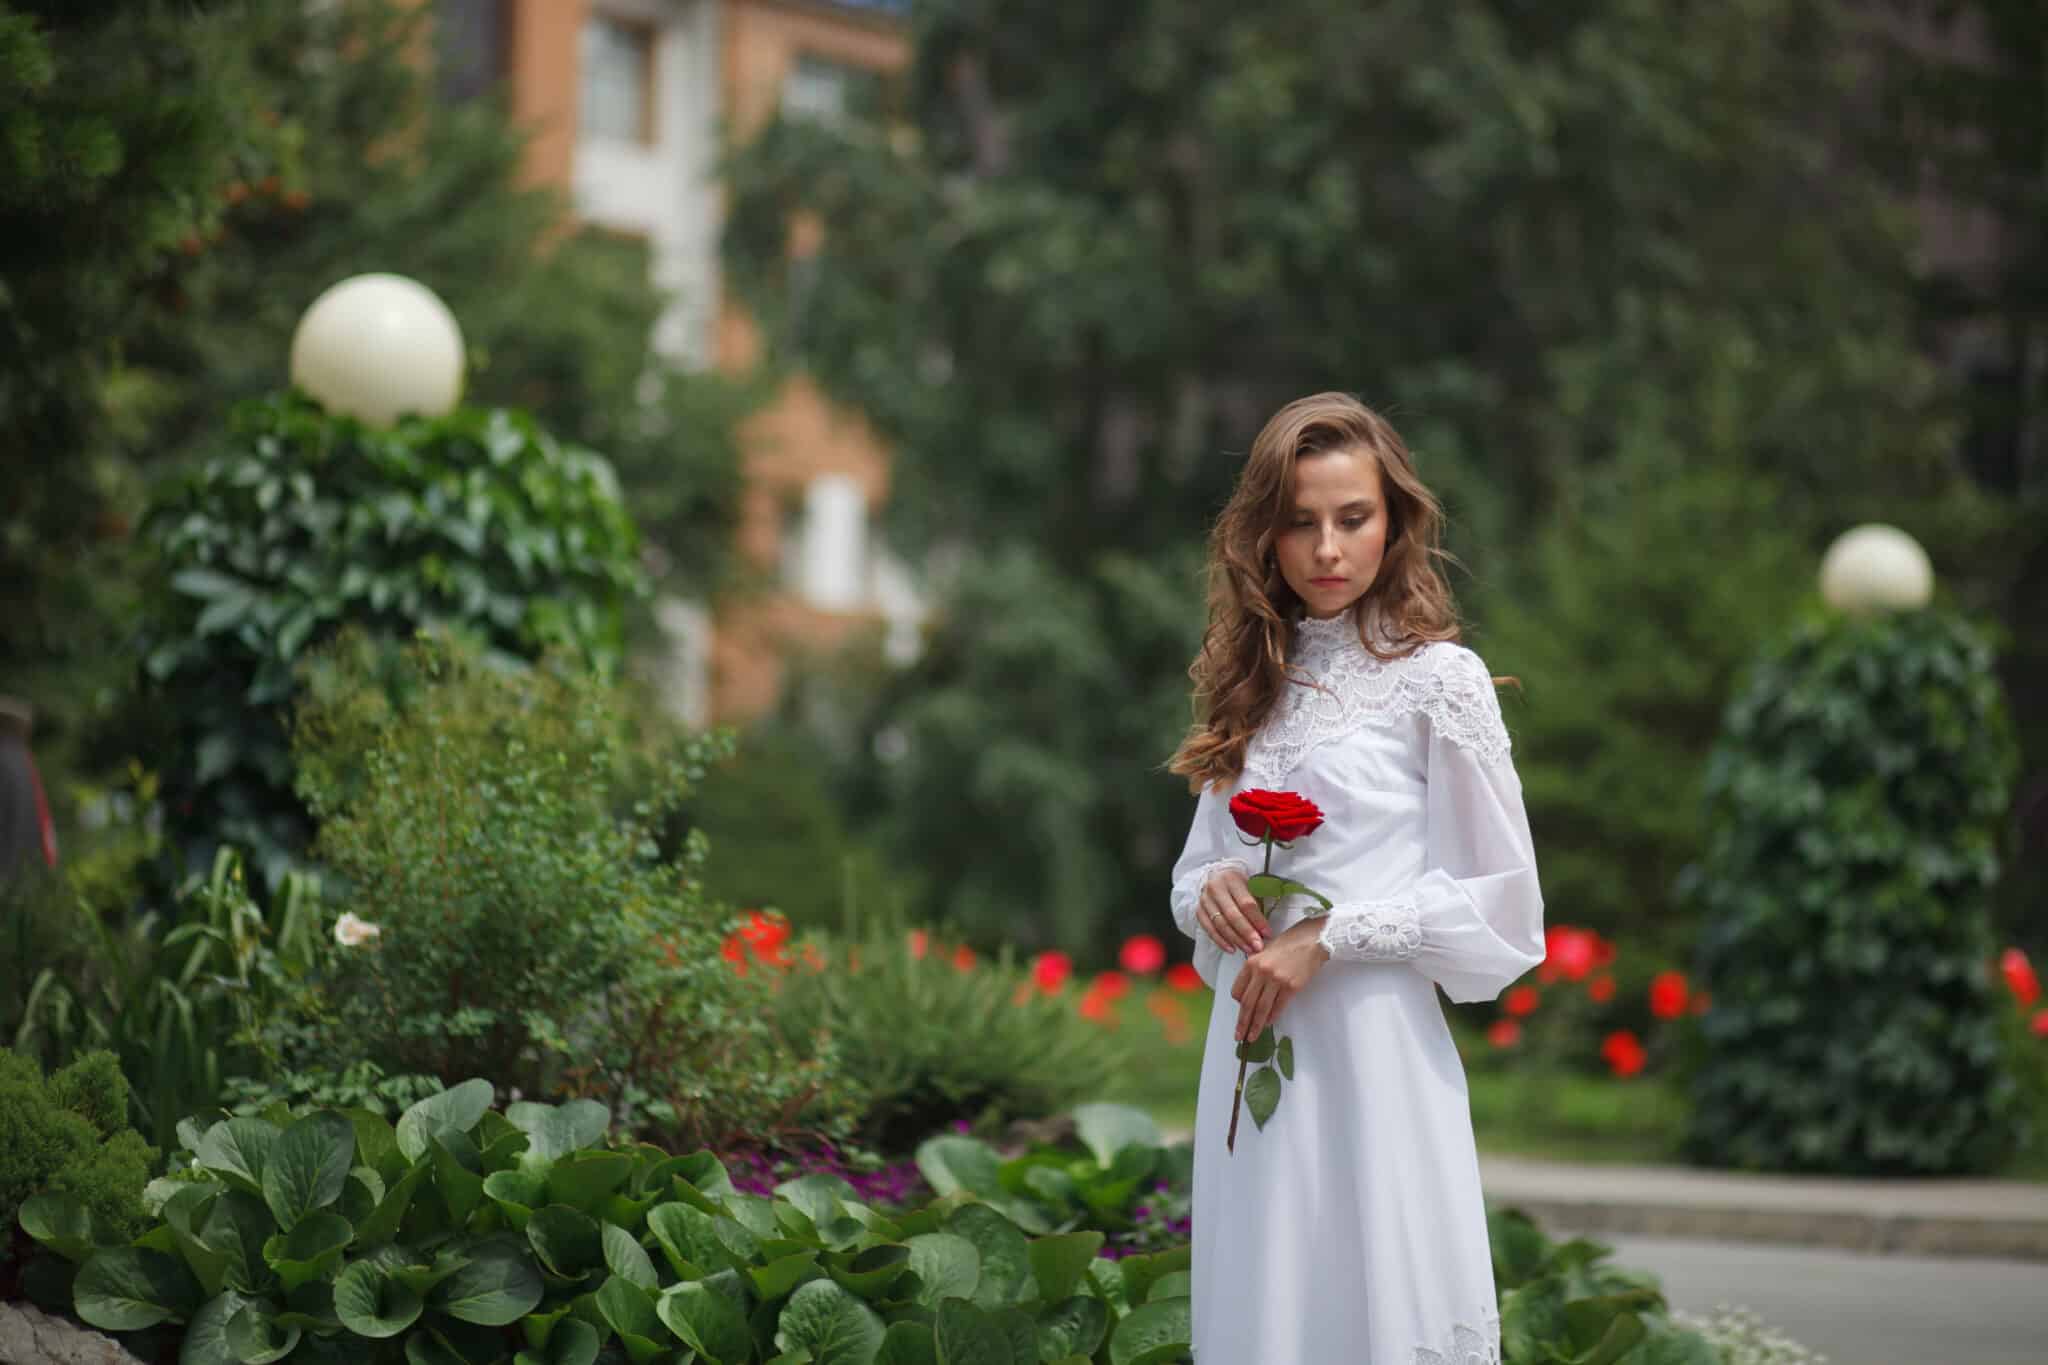 beautiful lady in a vintage dress walks in the garden holding a red rose
